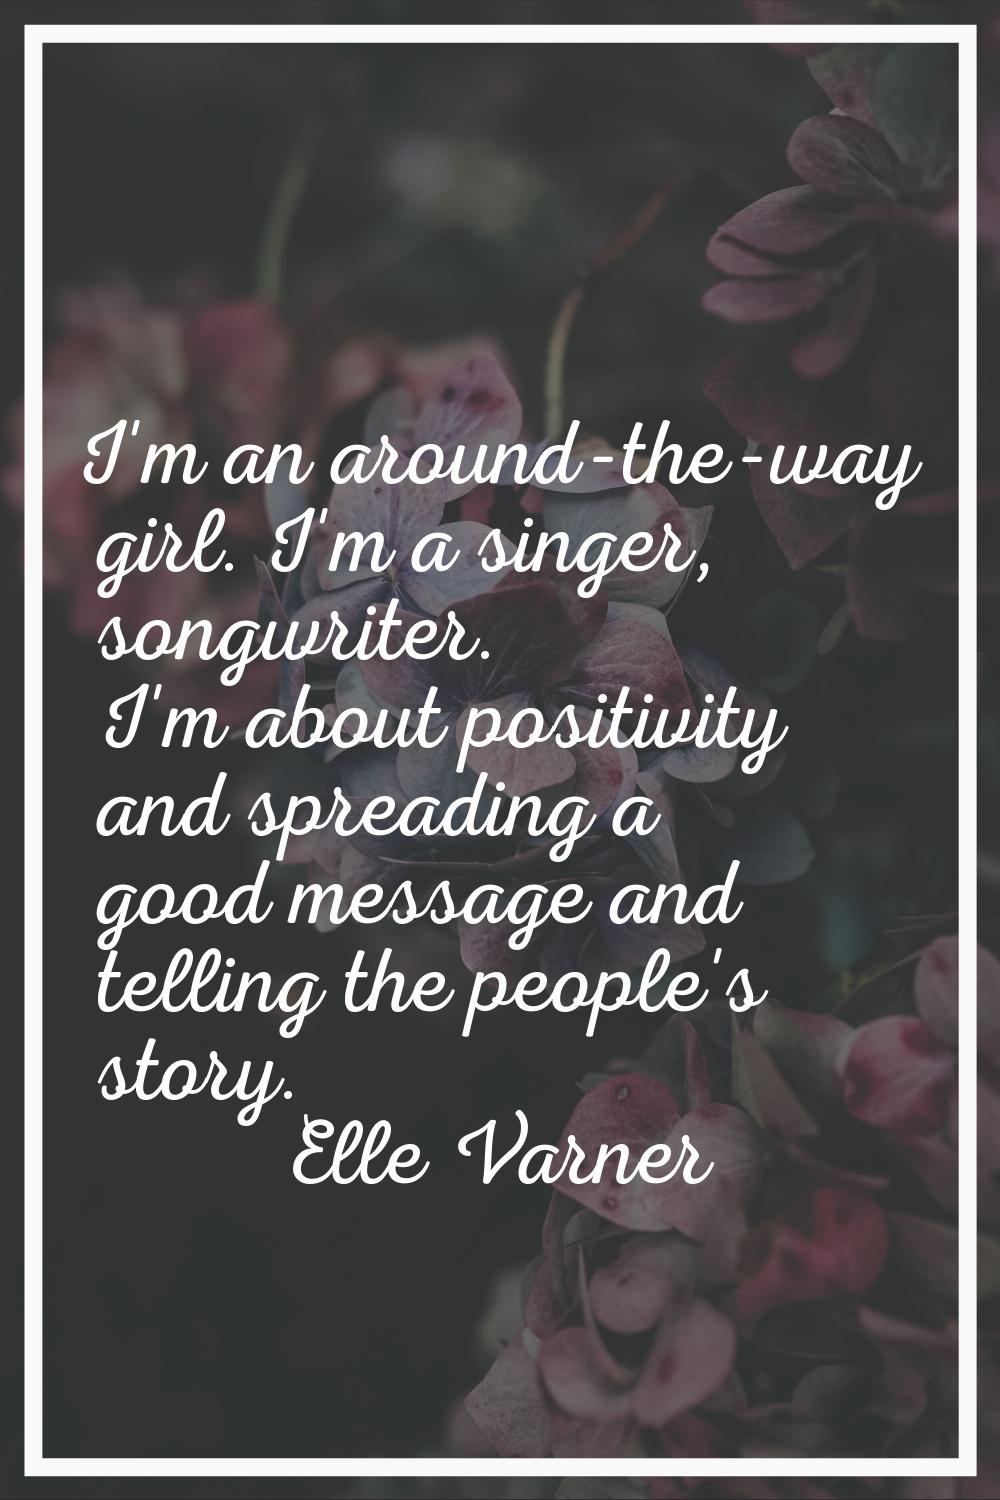 I'm an around-the-way girl. I'm a singer, songwriter. I'm about positivity and spreading a good mes